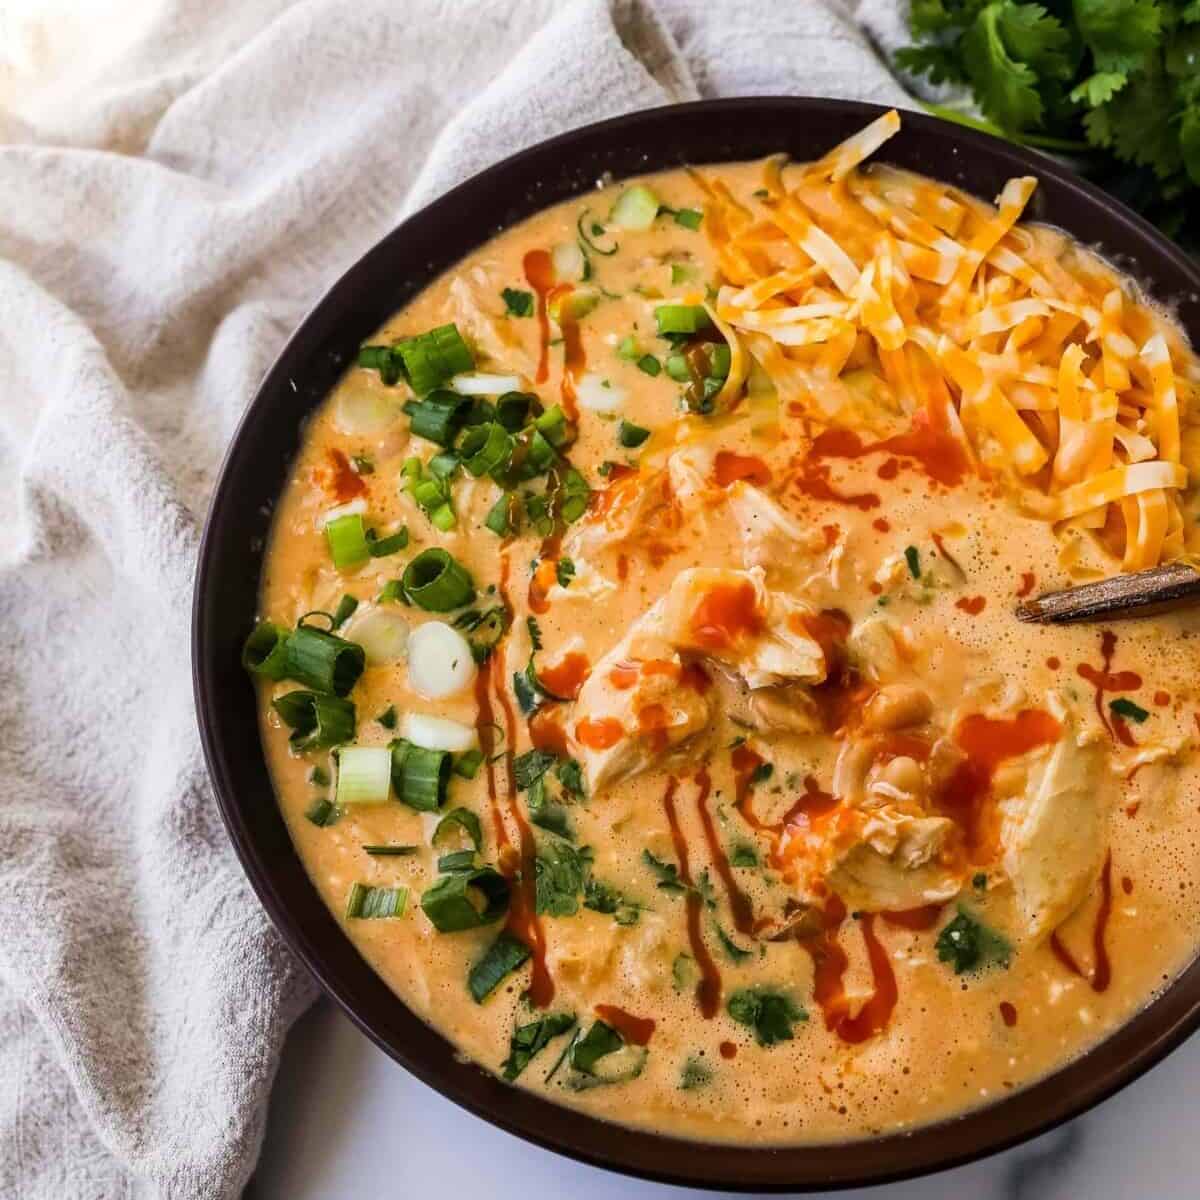 Overhead view of a bowl of buffalo chicken chili with cheese, green onions, and a drizzle of hot sauce.